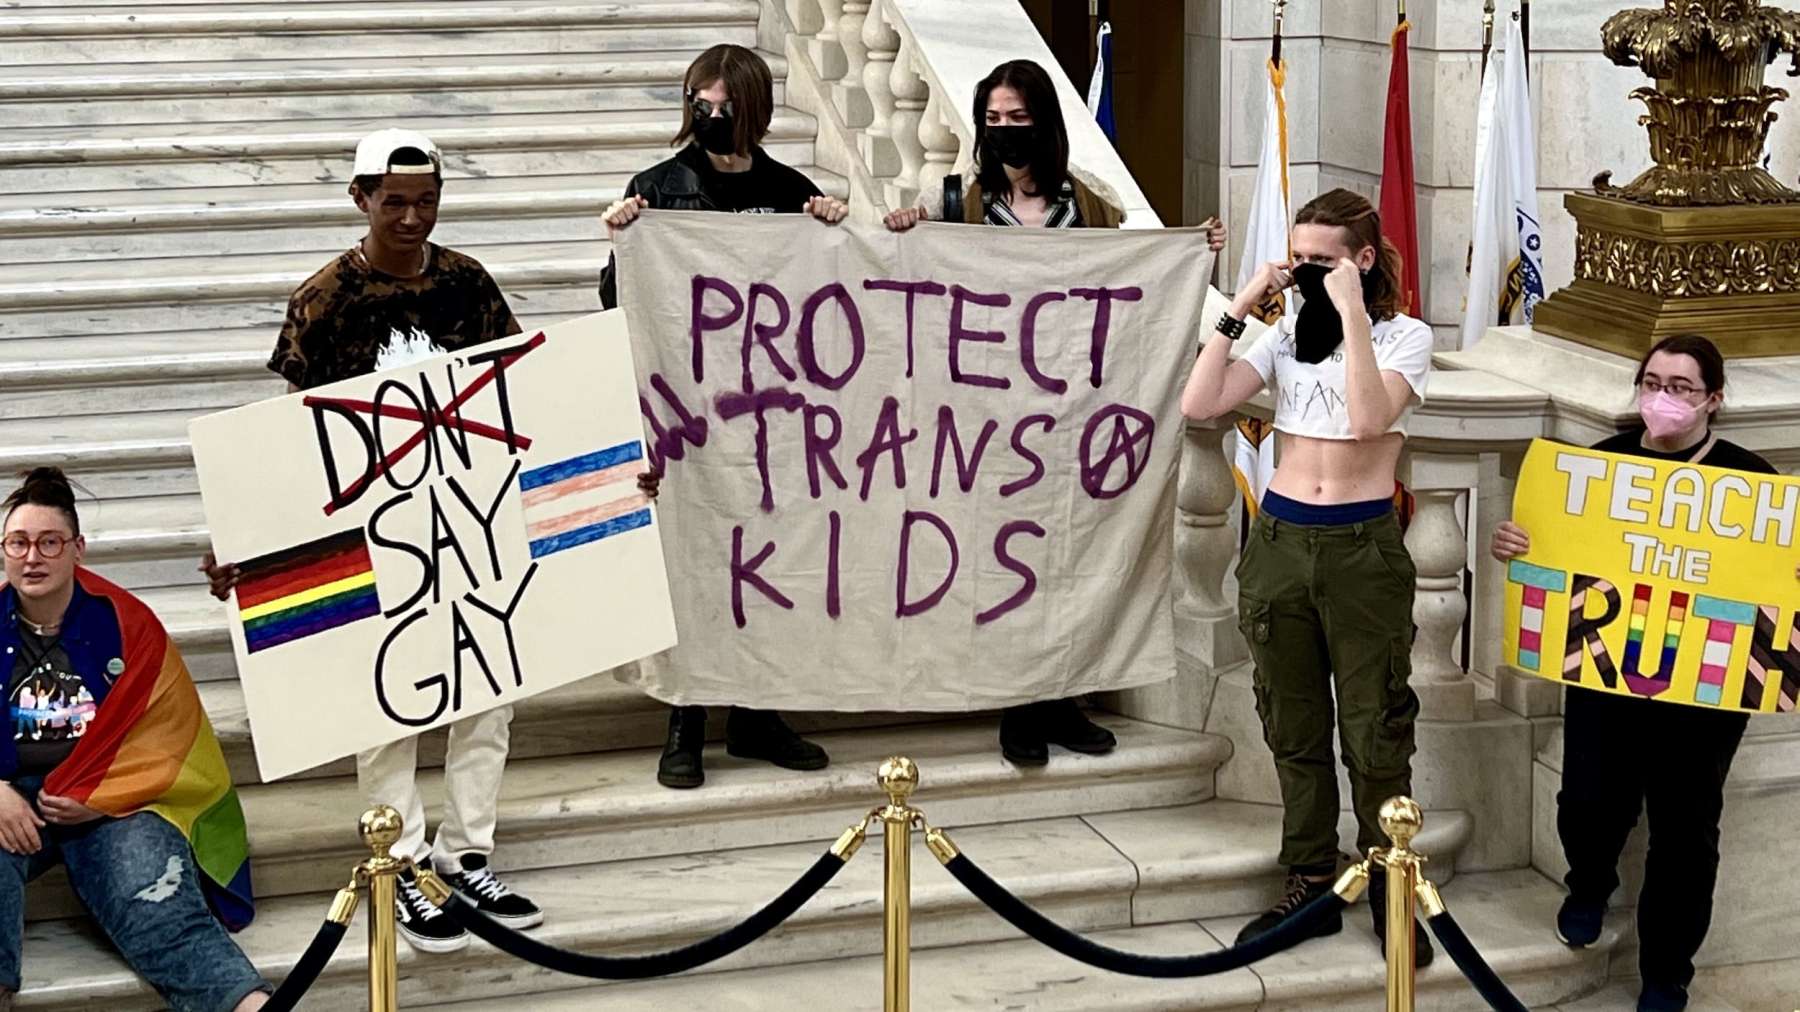 Rhode Island News: Overwhelming opposition to Rep Morgan’s anti-trans anti-education bill during hearing